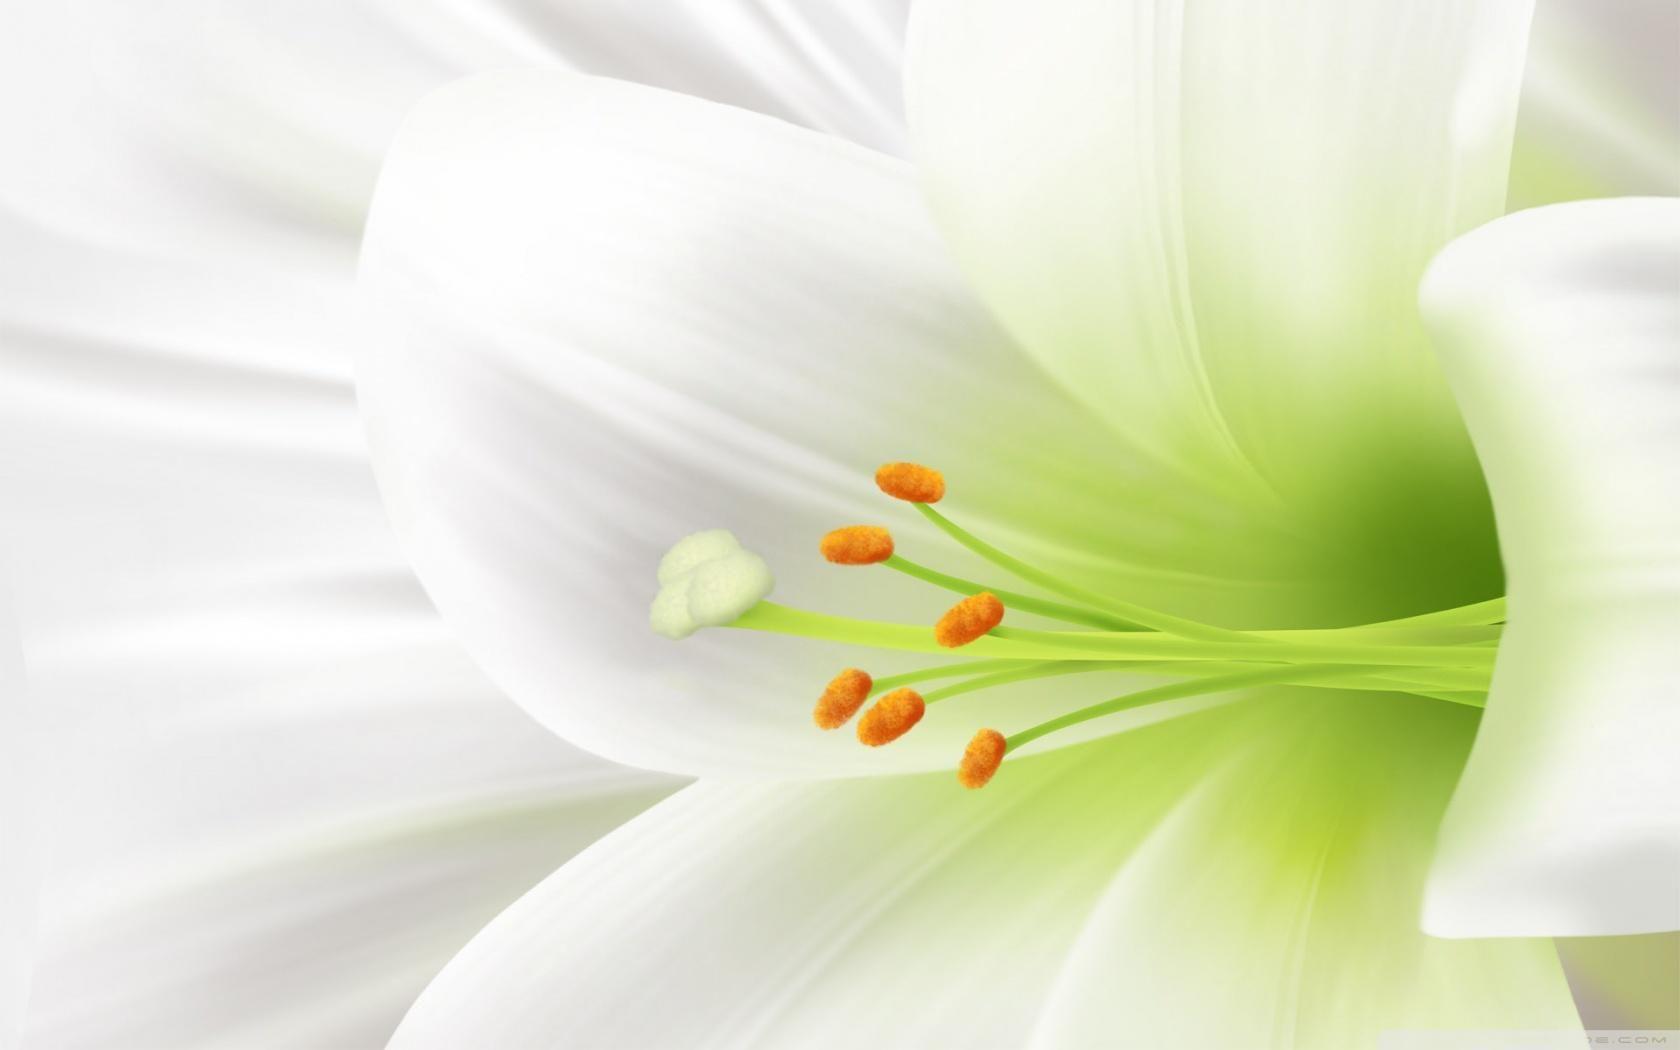 Lily Flower Wallpapers - Top Free Lily Flower Backgrounds - WallpaperAccess